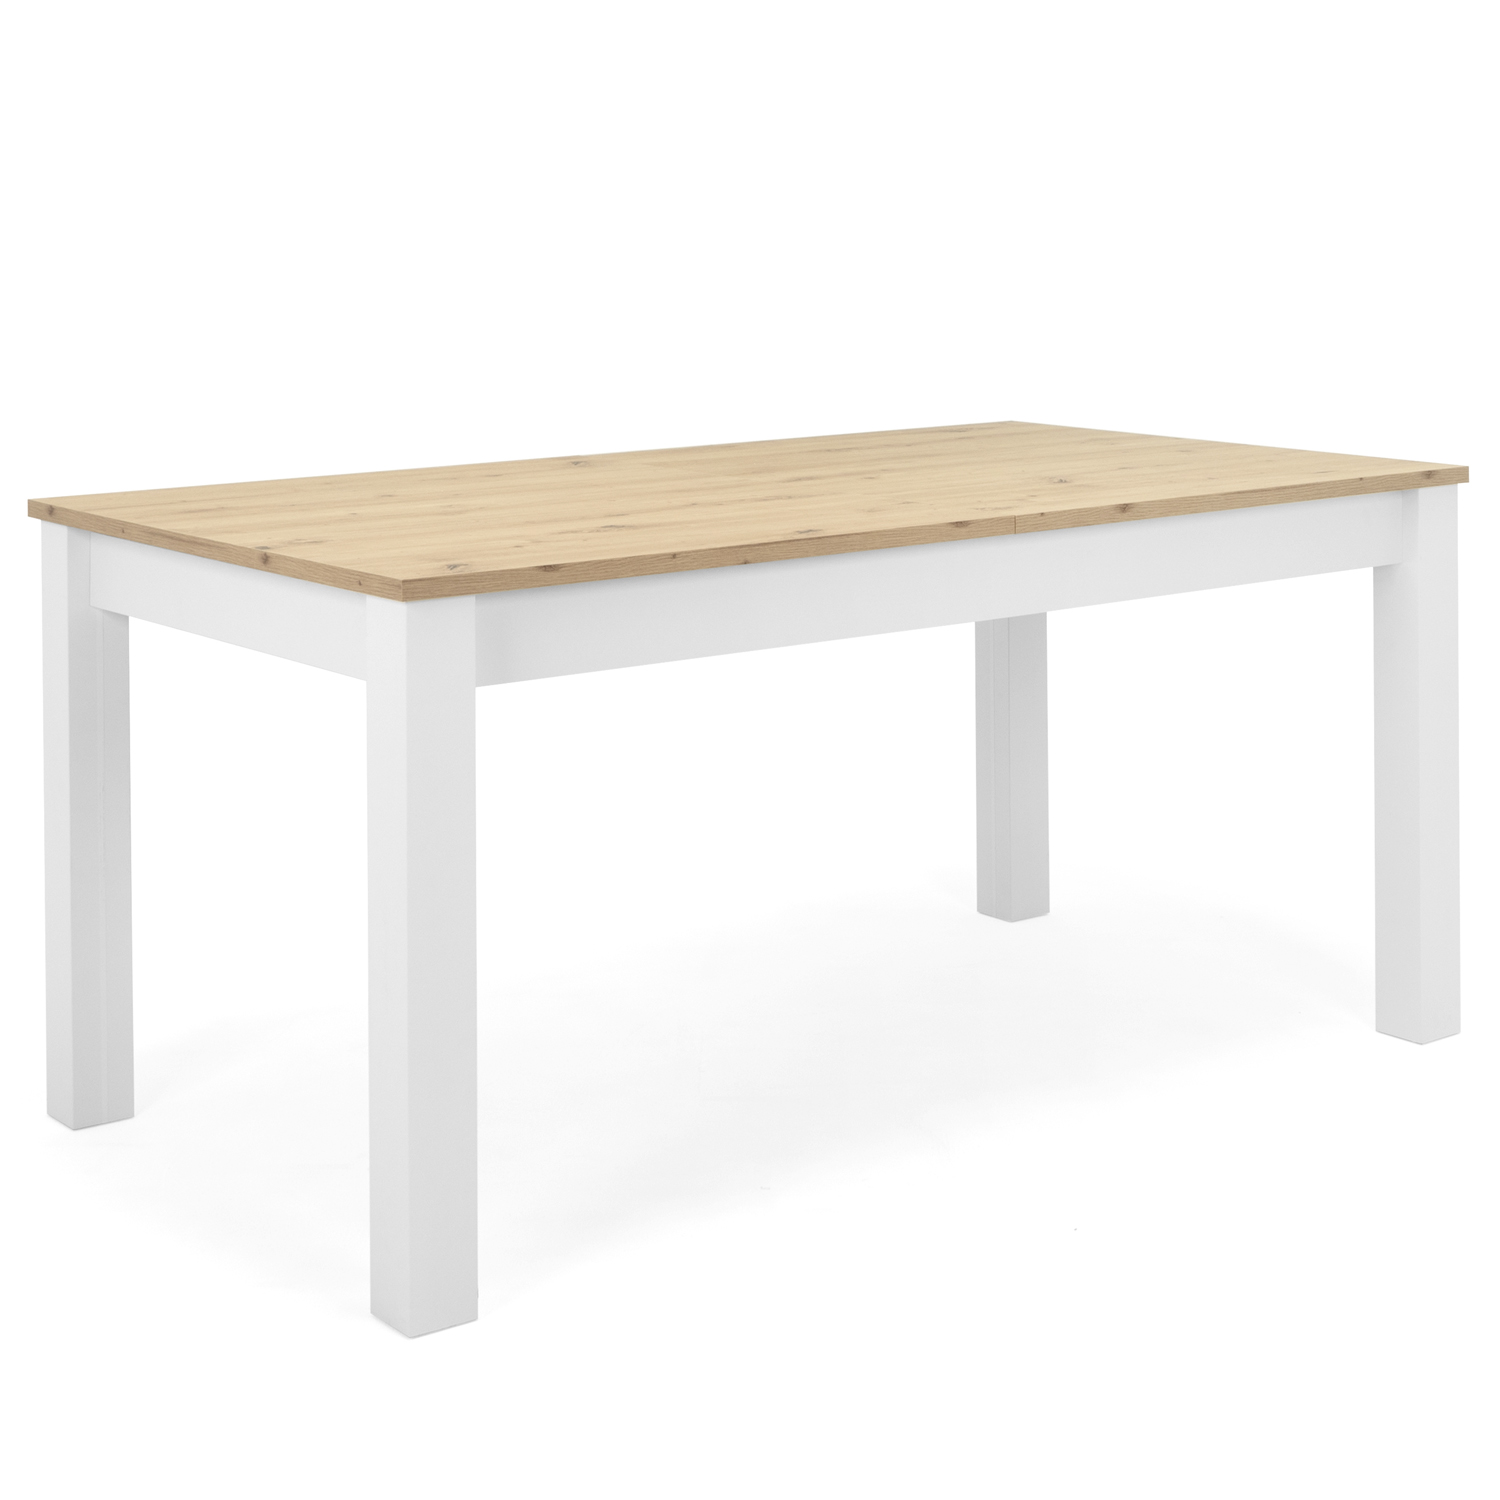 Dining Table Extendable with 4 Chairs Grey Dining Room Table Wooden Table White